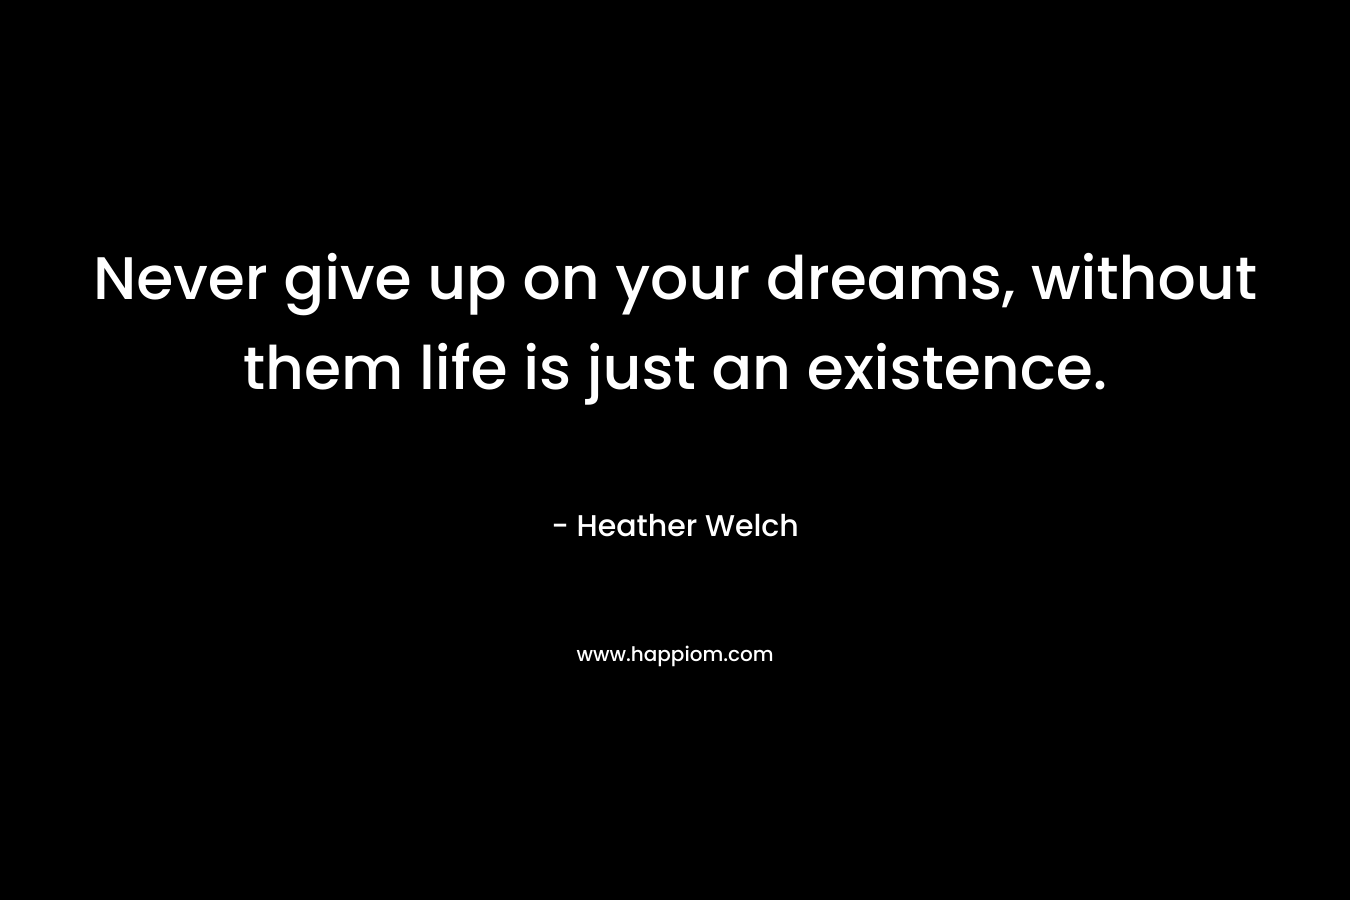 Never give up on your dreams, without them life is just an existence.